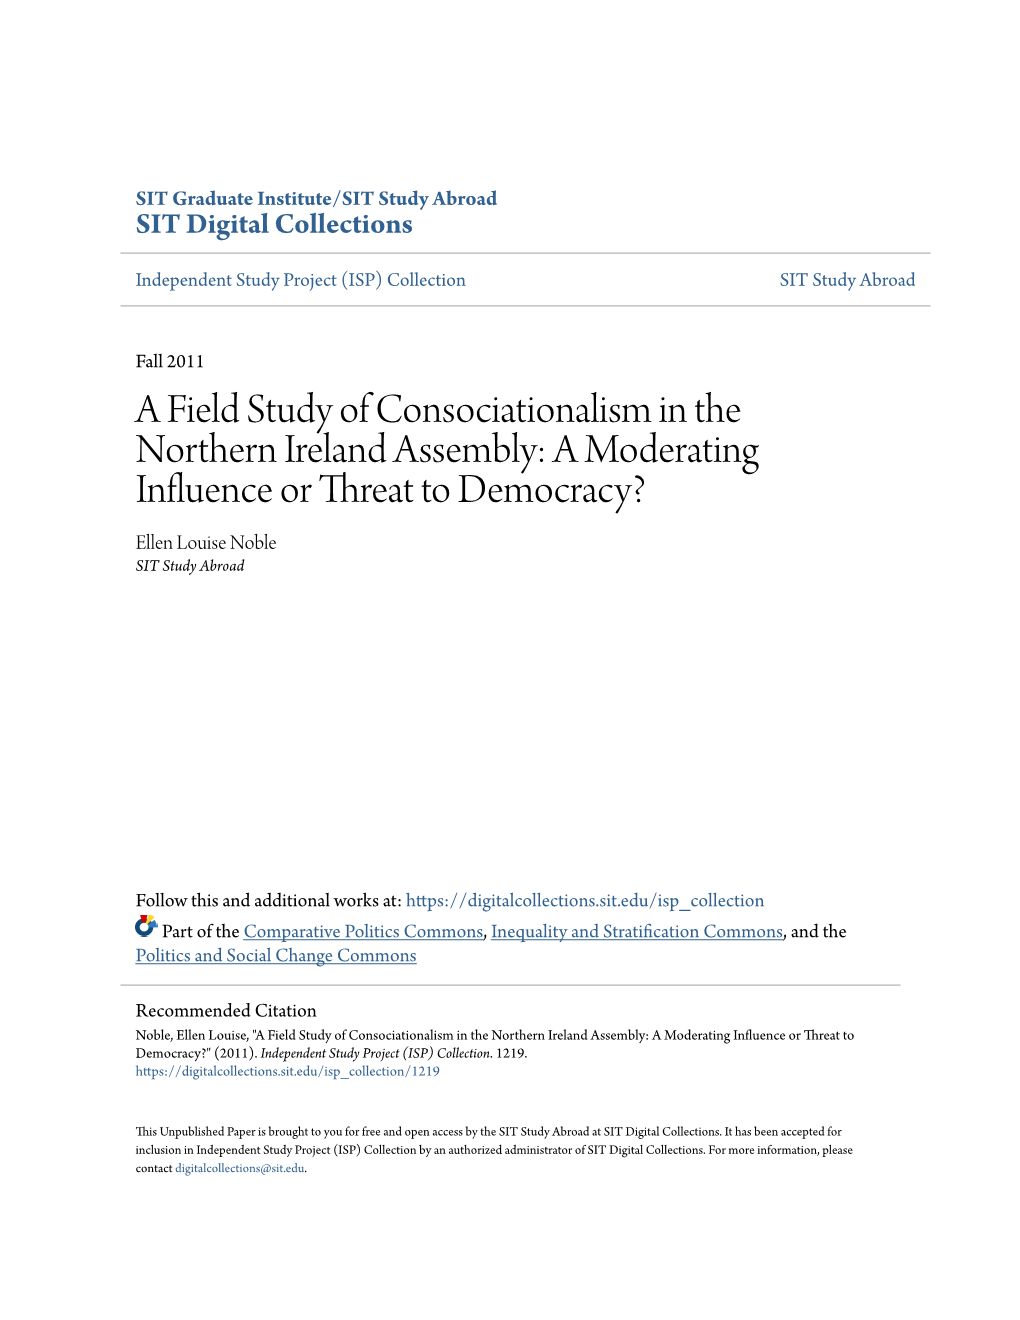 A Field Study of Consociationalism in the Northern Ireland Assembly: a Moderating Influence Or Threat to Democracy? Ellen Louise Noble SIT Study Abroad